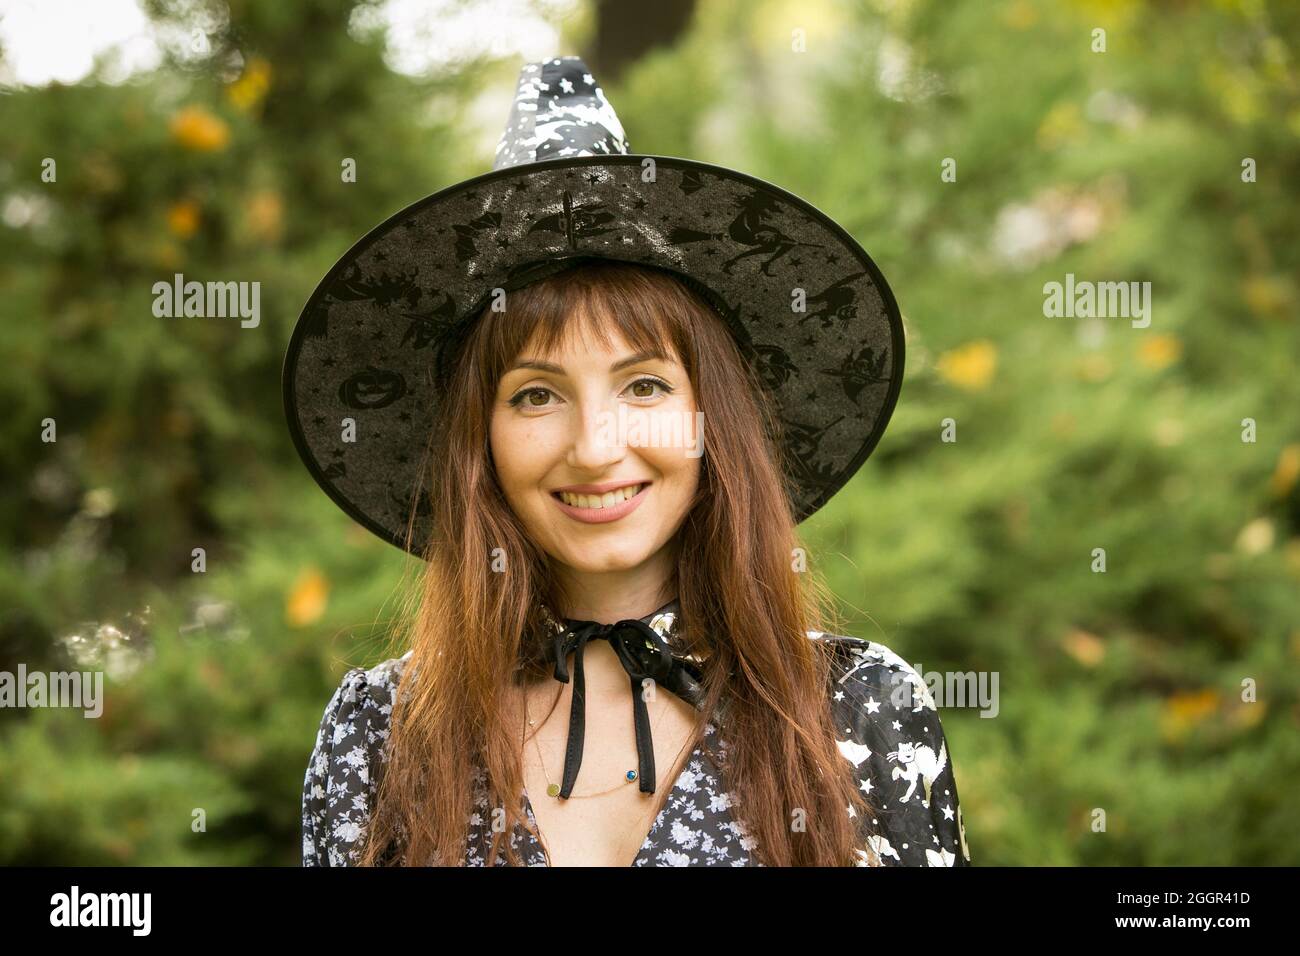 Halloween. Beautiful young woman in a festive mood at a Halloween picnic. Warm autumn October day. Emotion concept. Stock Photo